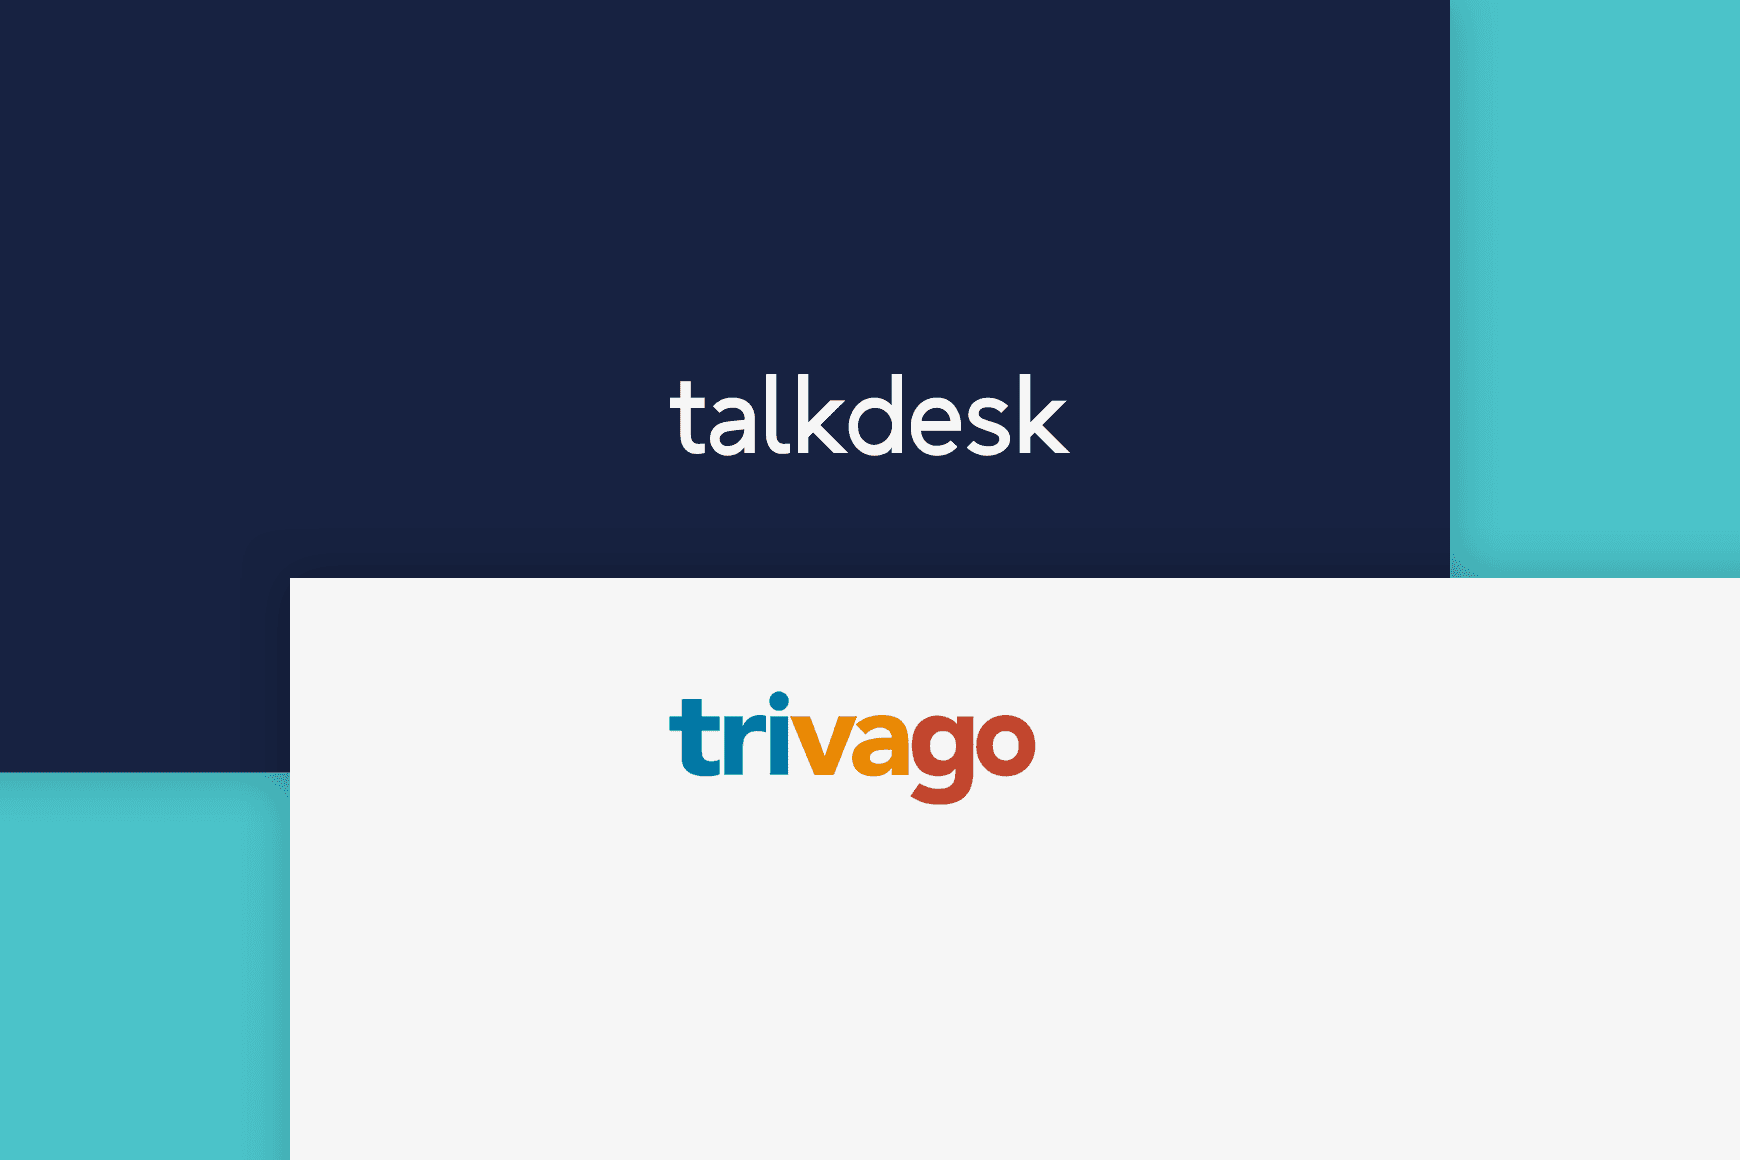 Trivago Hotel Relations confirms Talkdesk chosen for new contact center solution